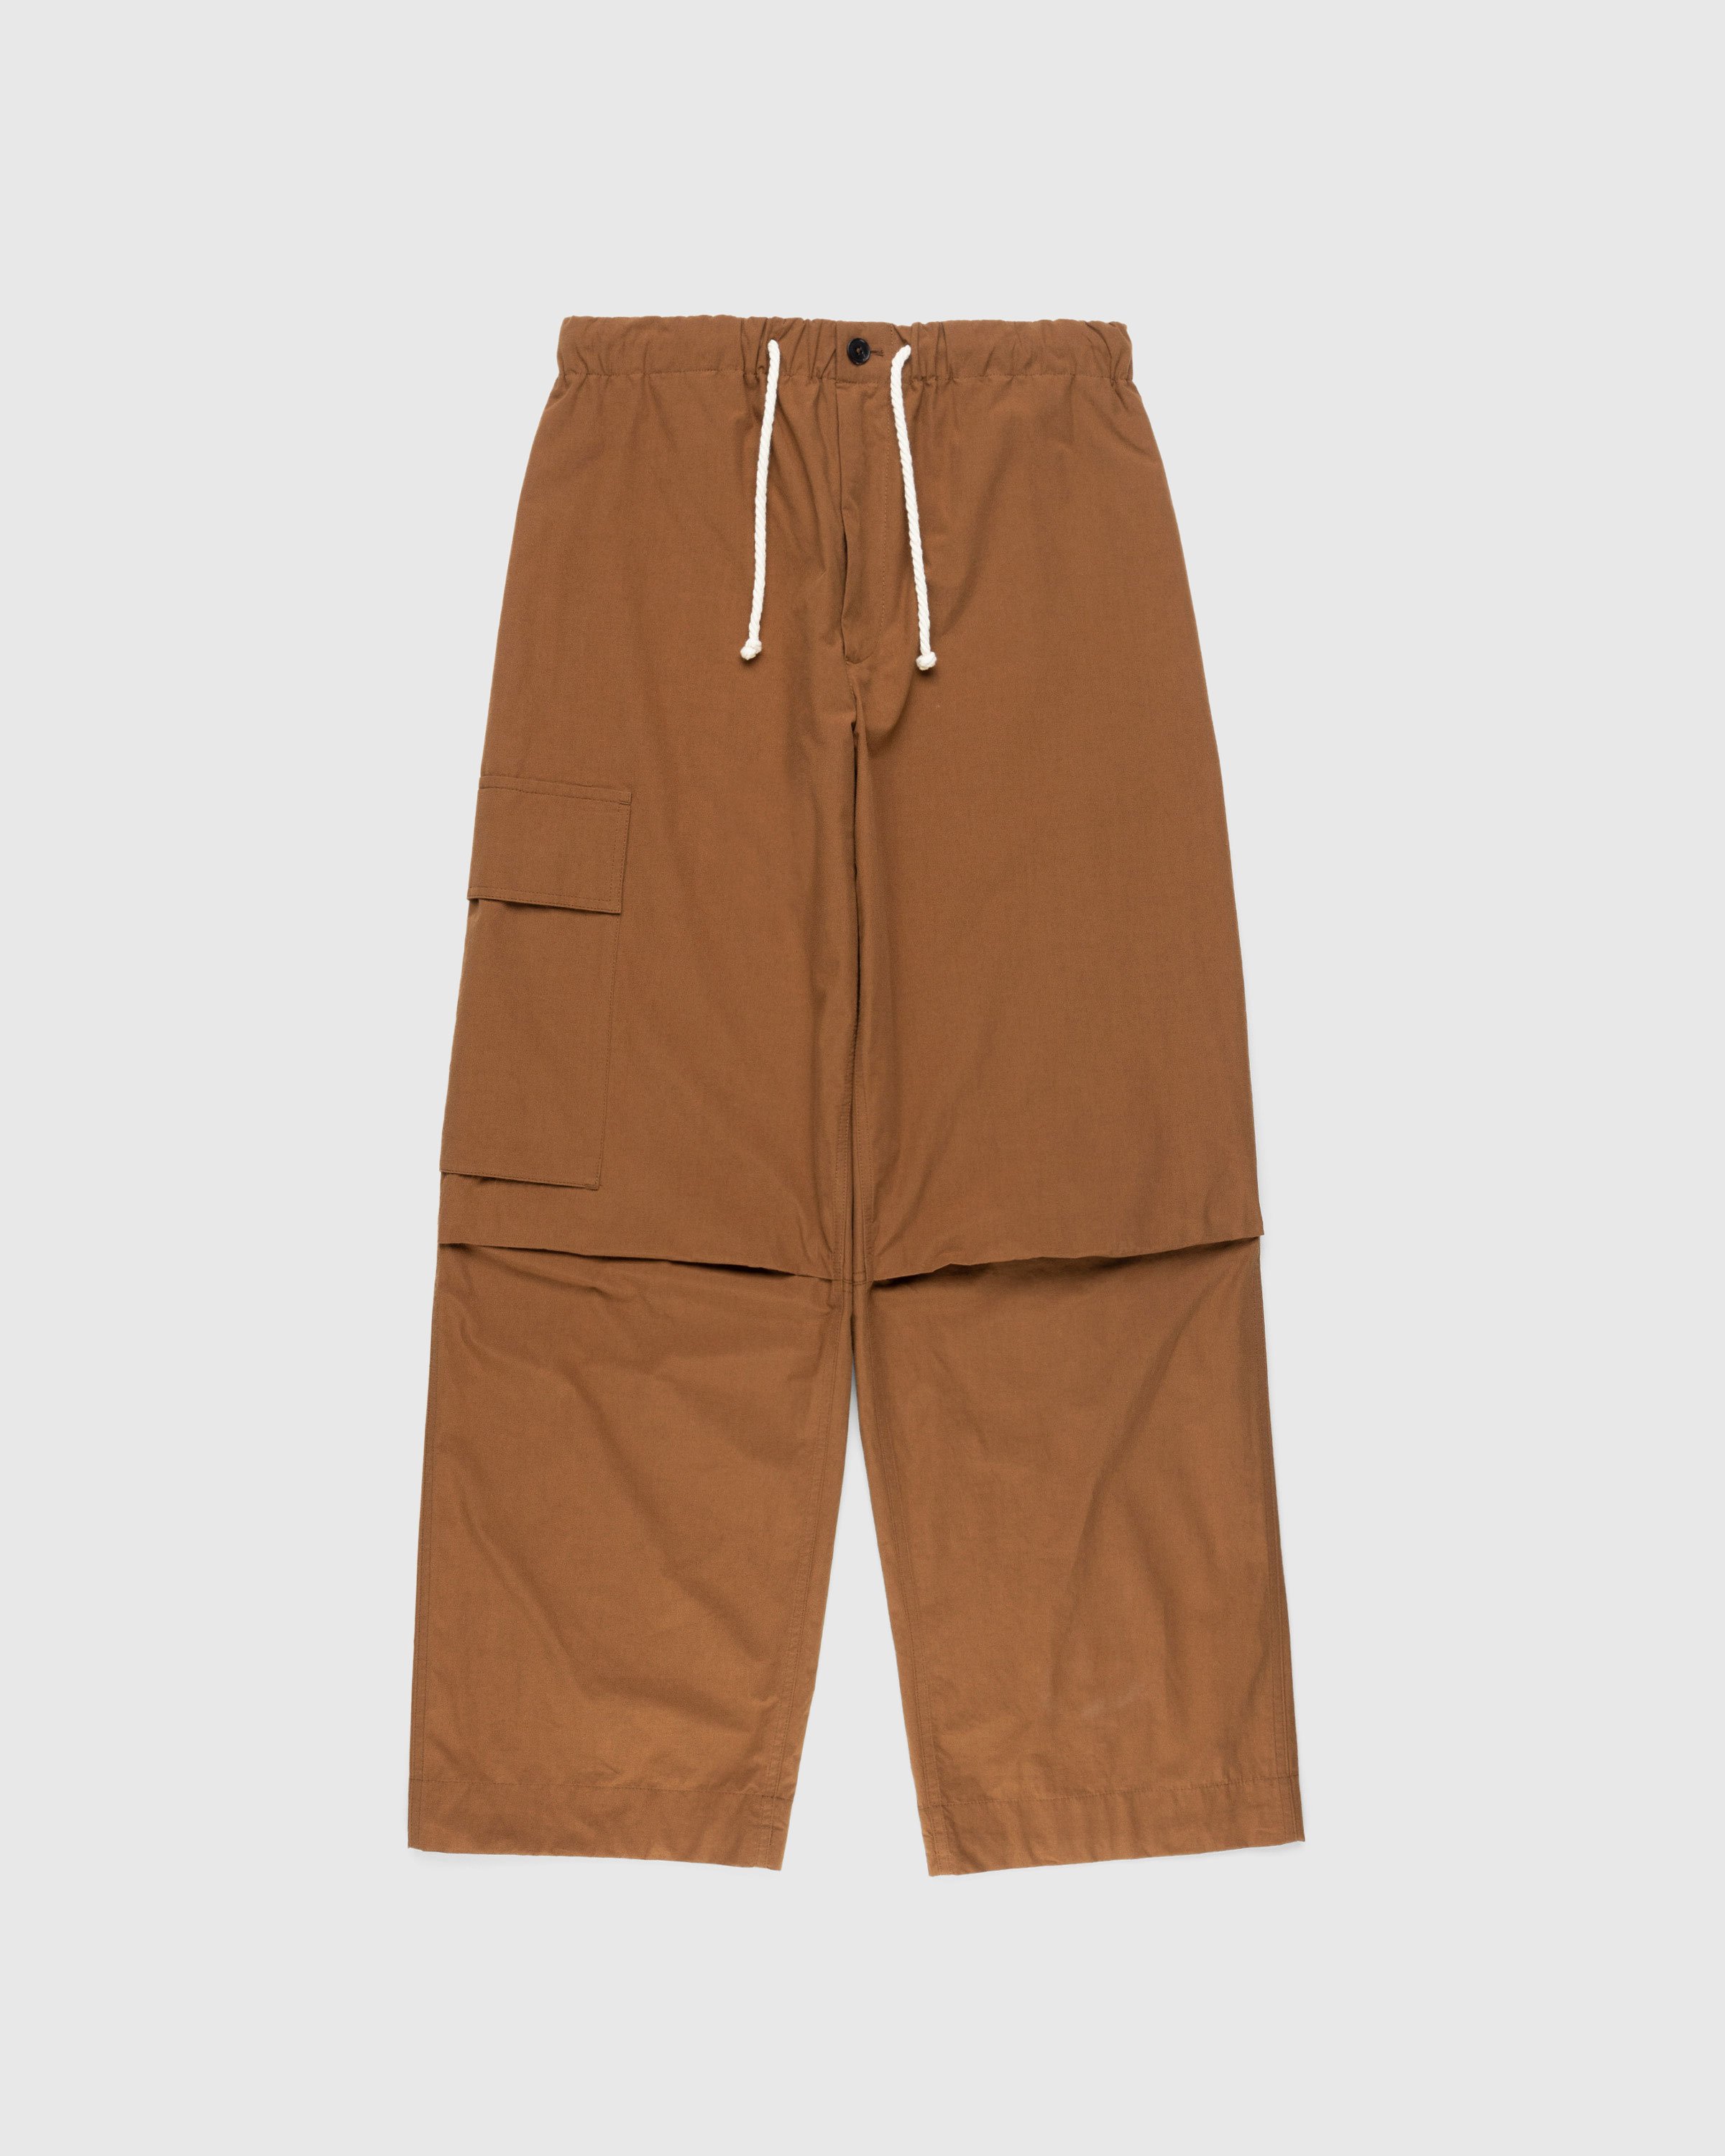 Jil Sander - Relaxed-Fit Cotton Trousers Tobacco - Clothing - Brown - Image 1